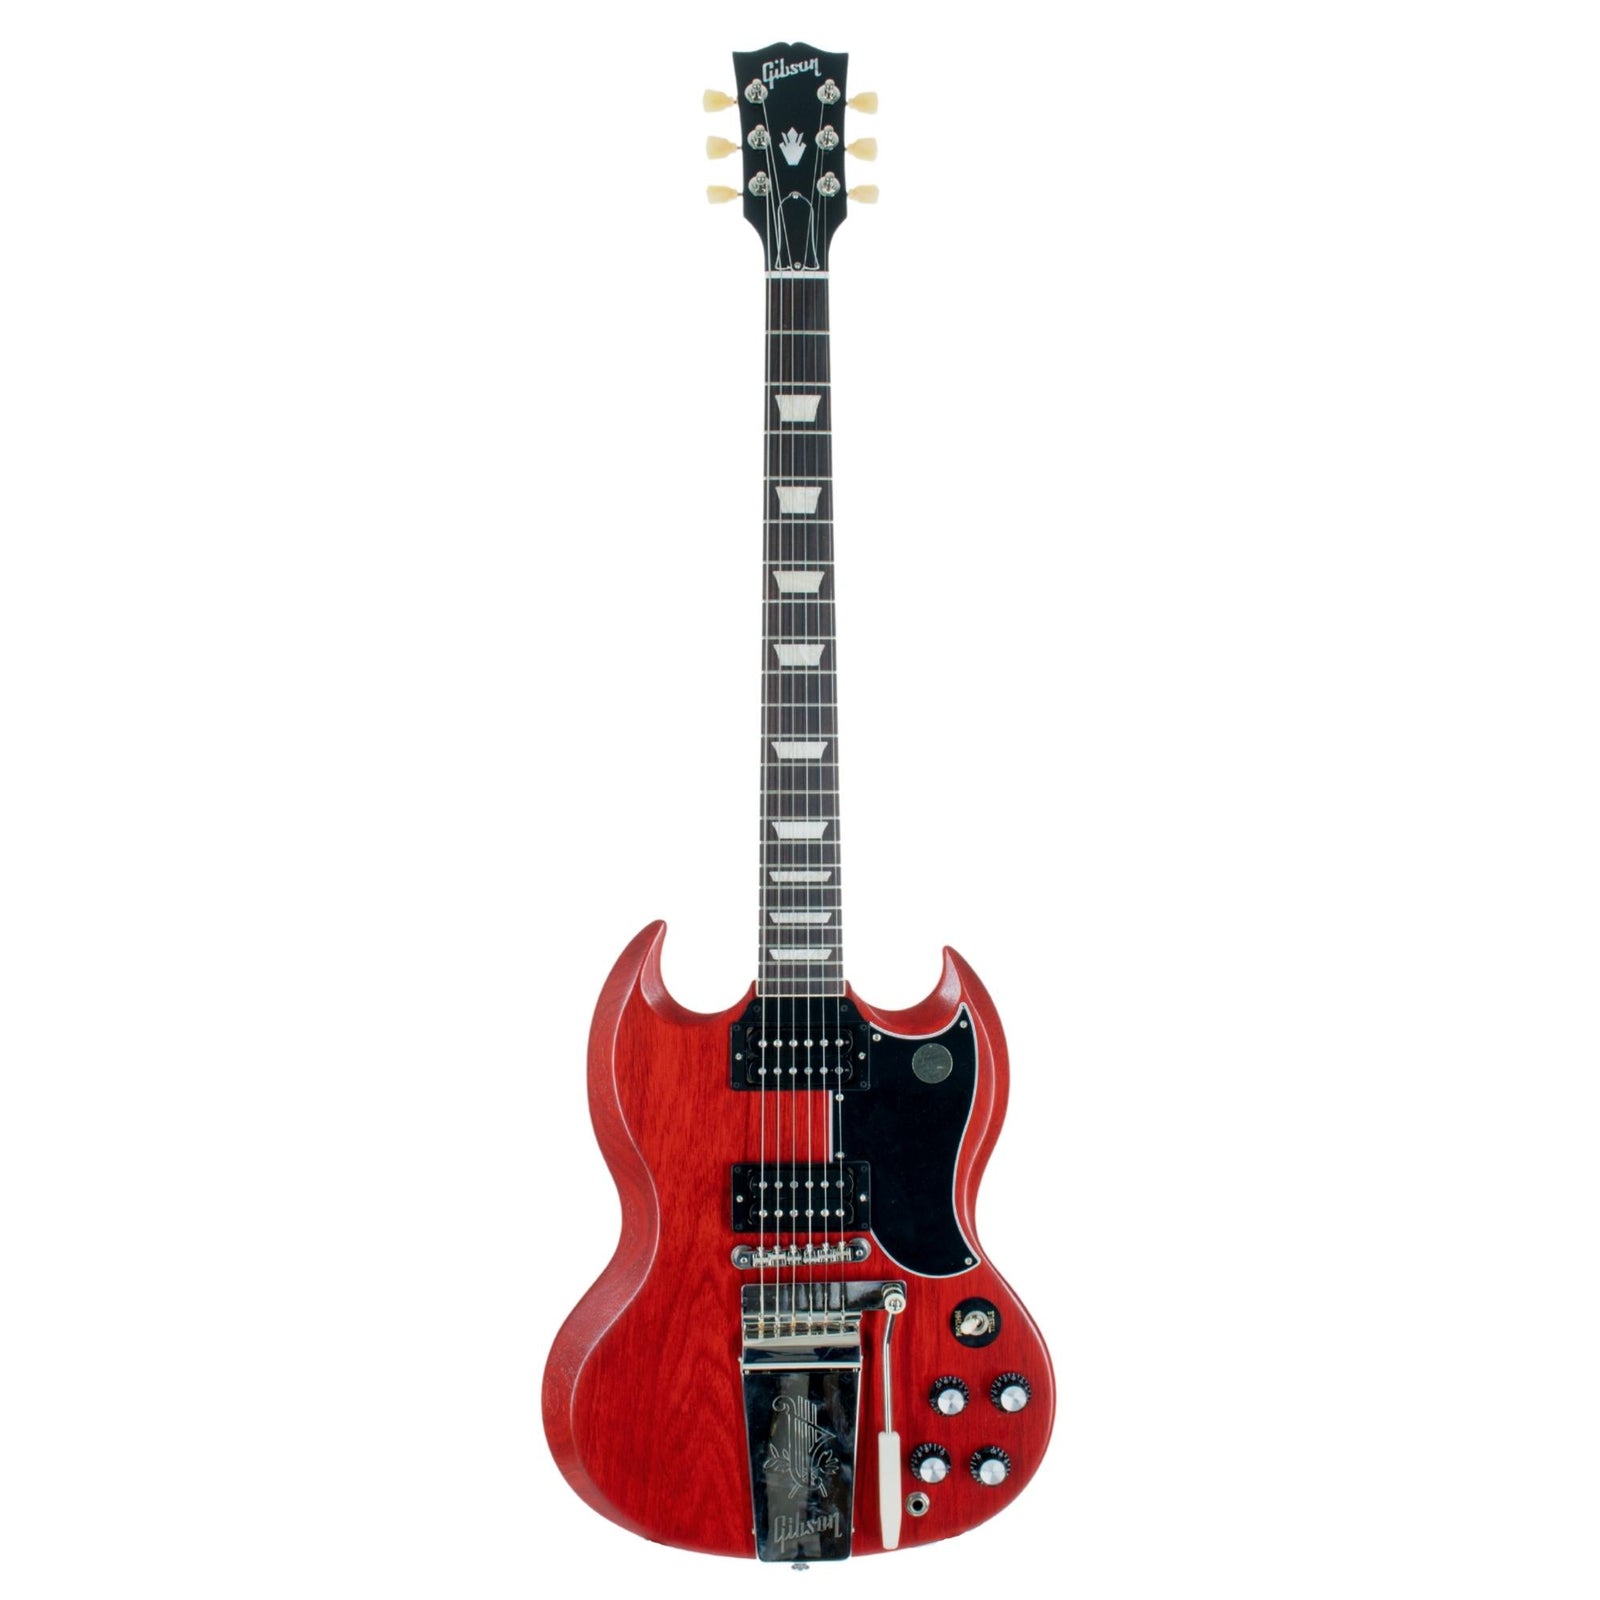 Gibson Sg Standard 61 Faded Maestro Vibrola Vintage Cherry Electric